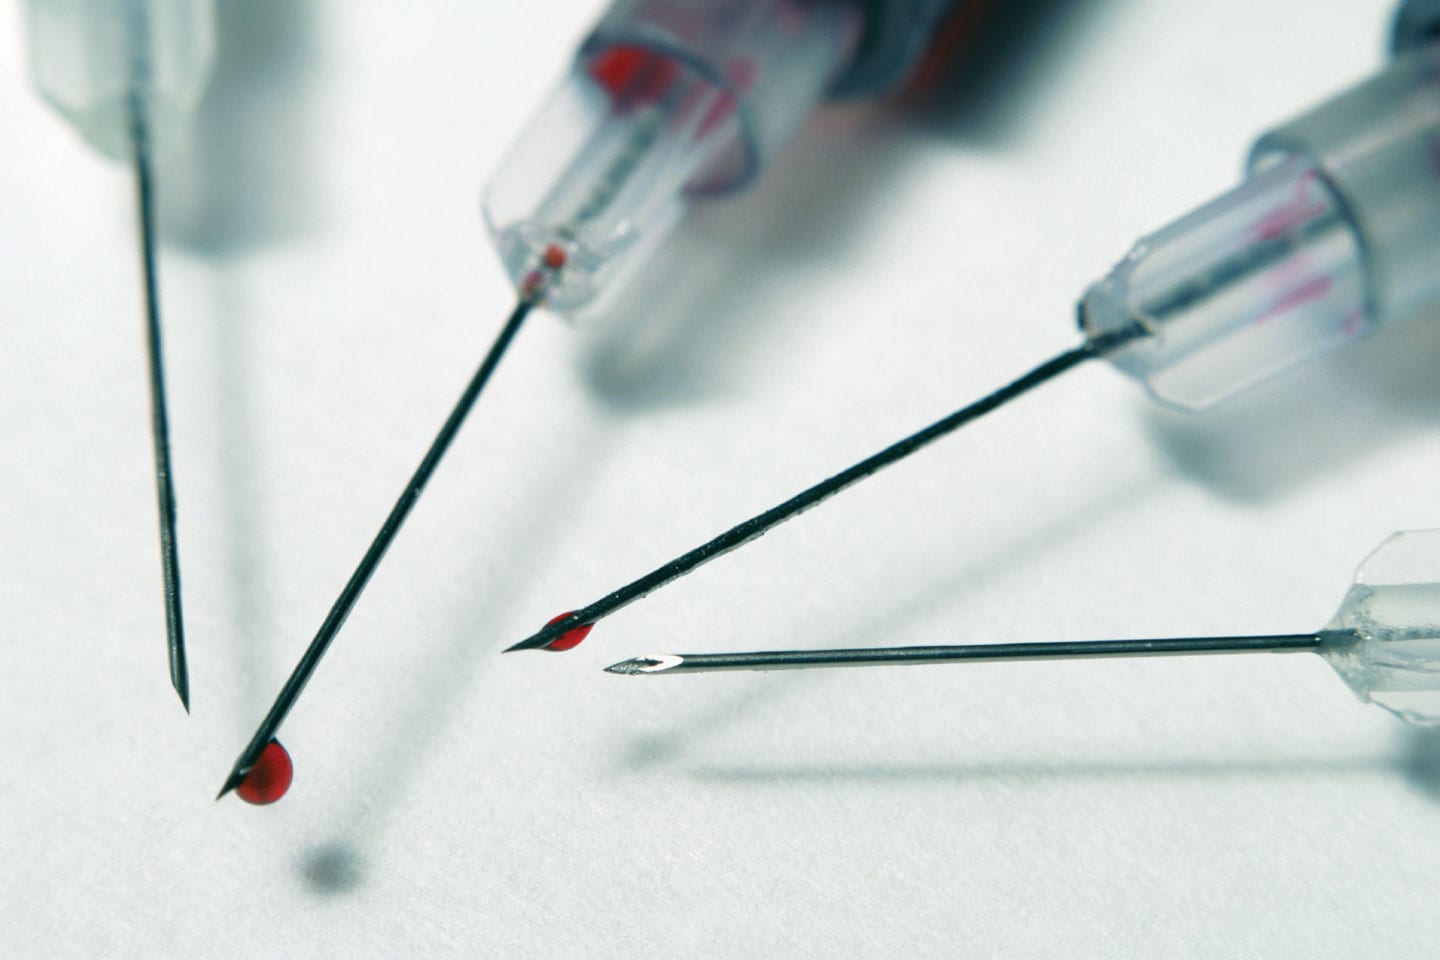 4 needles with blood drips on the syringes